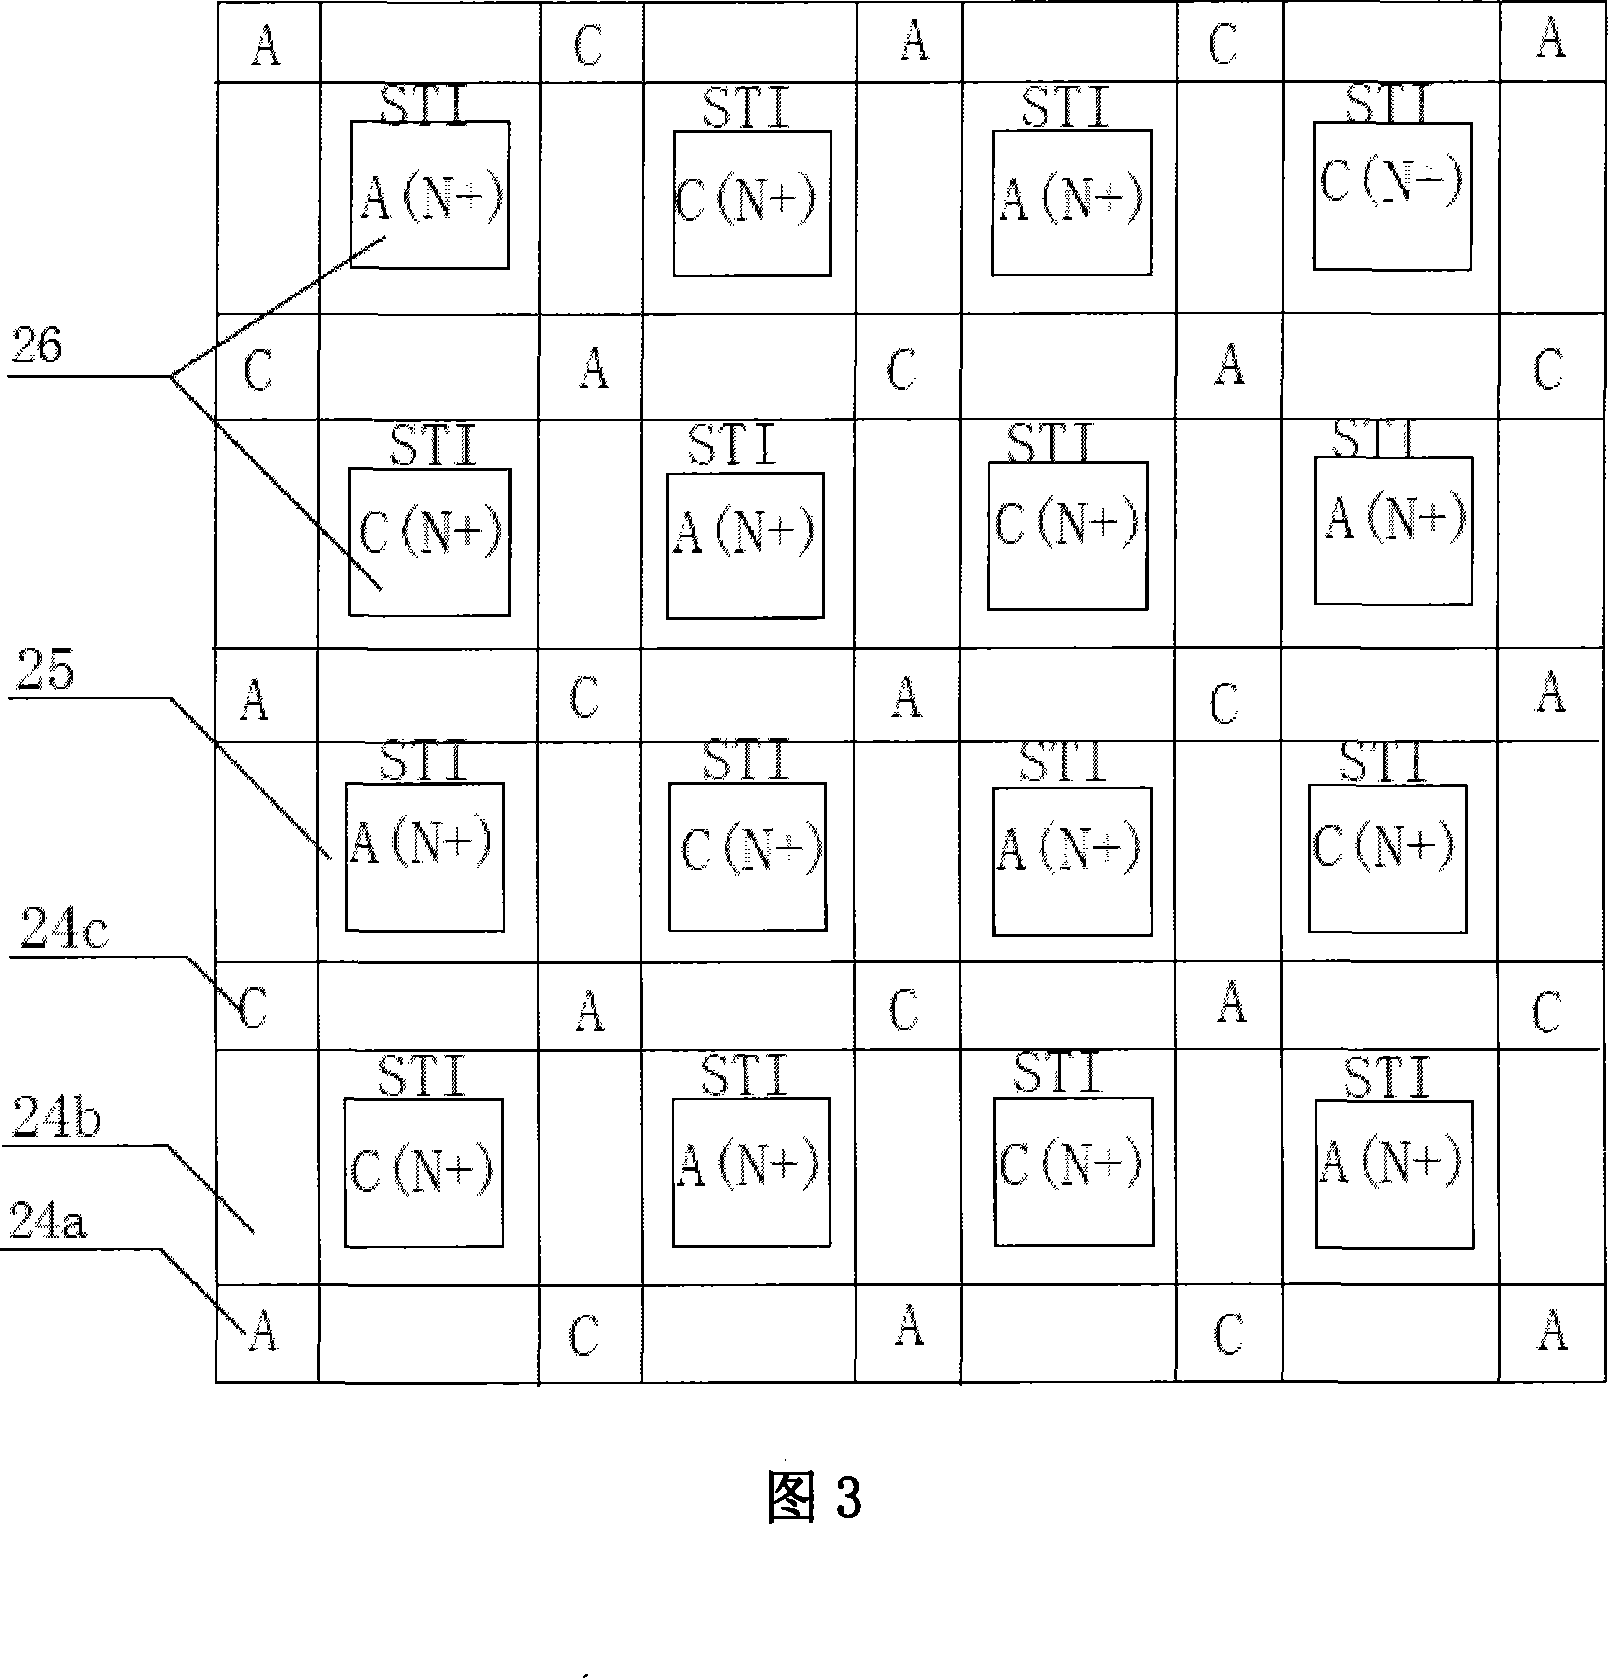 Grid-shaped electrostatic discharge protection device